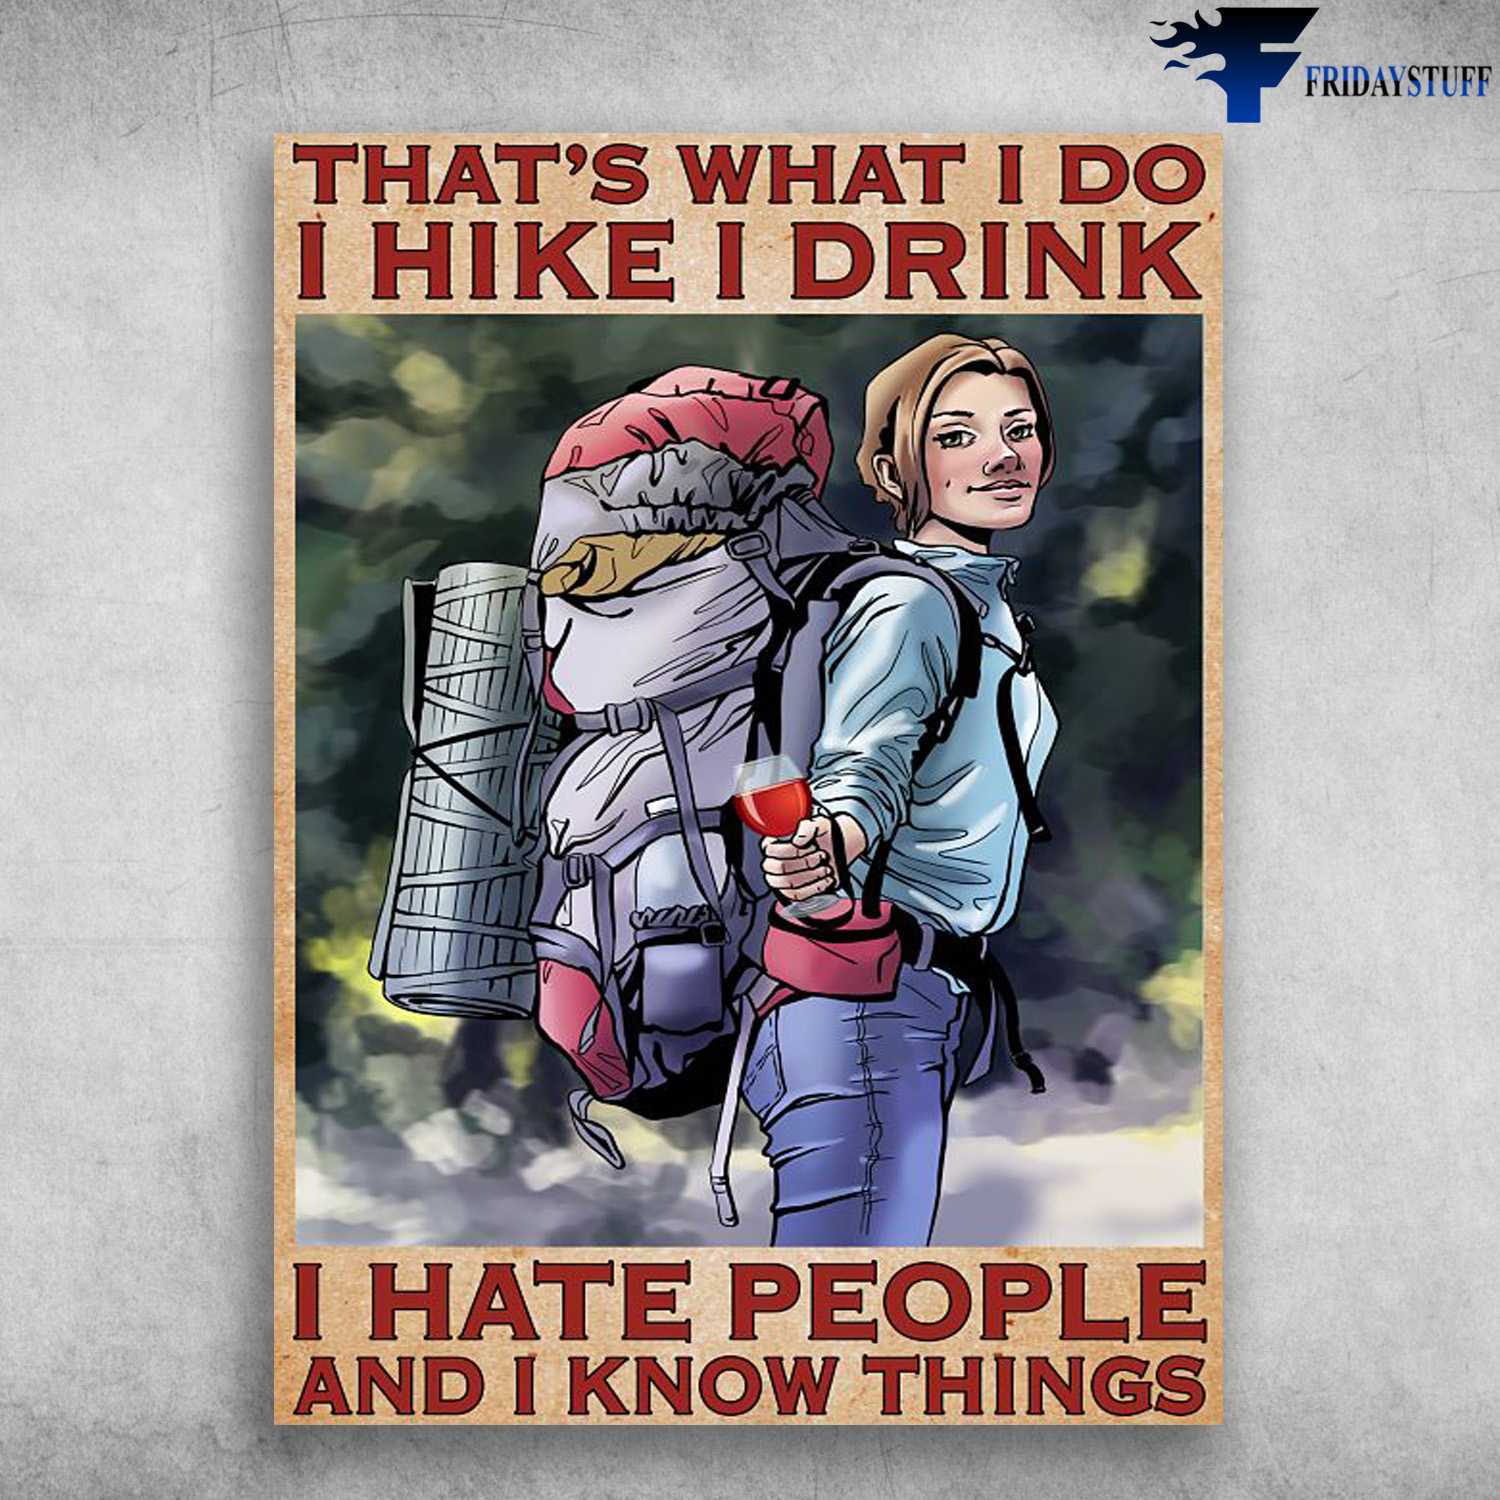 Hiking Girl, Hiking With Wine, That's What I Do, I Hike, I Drink, I Hate People, And I Know Things